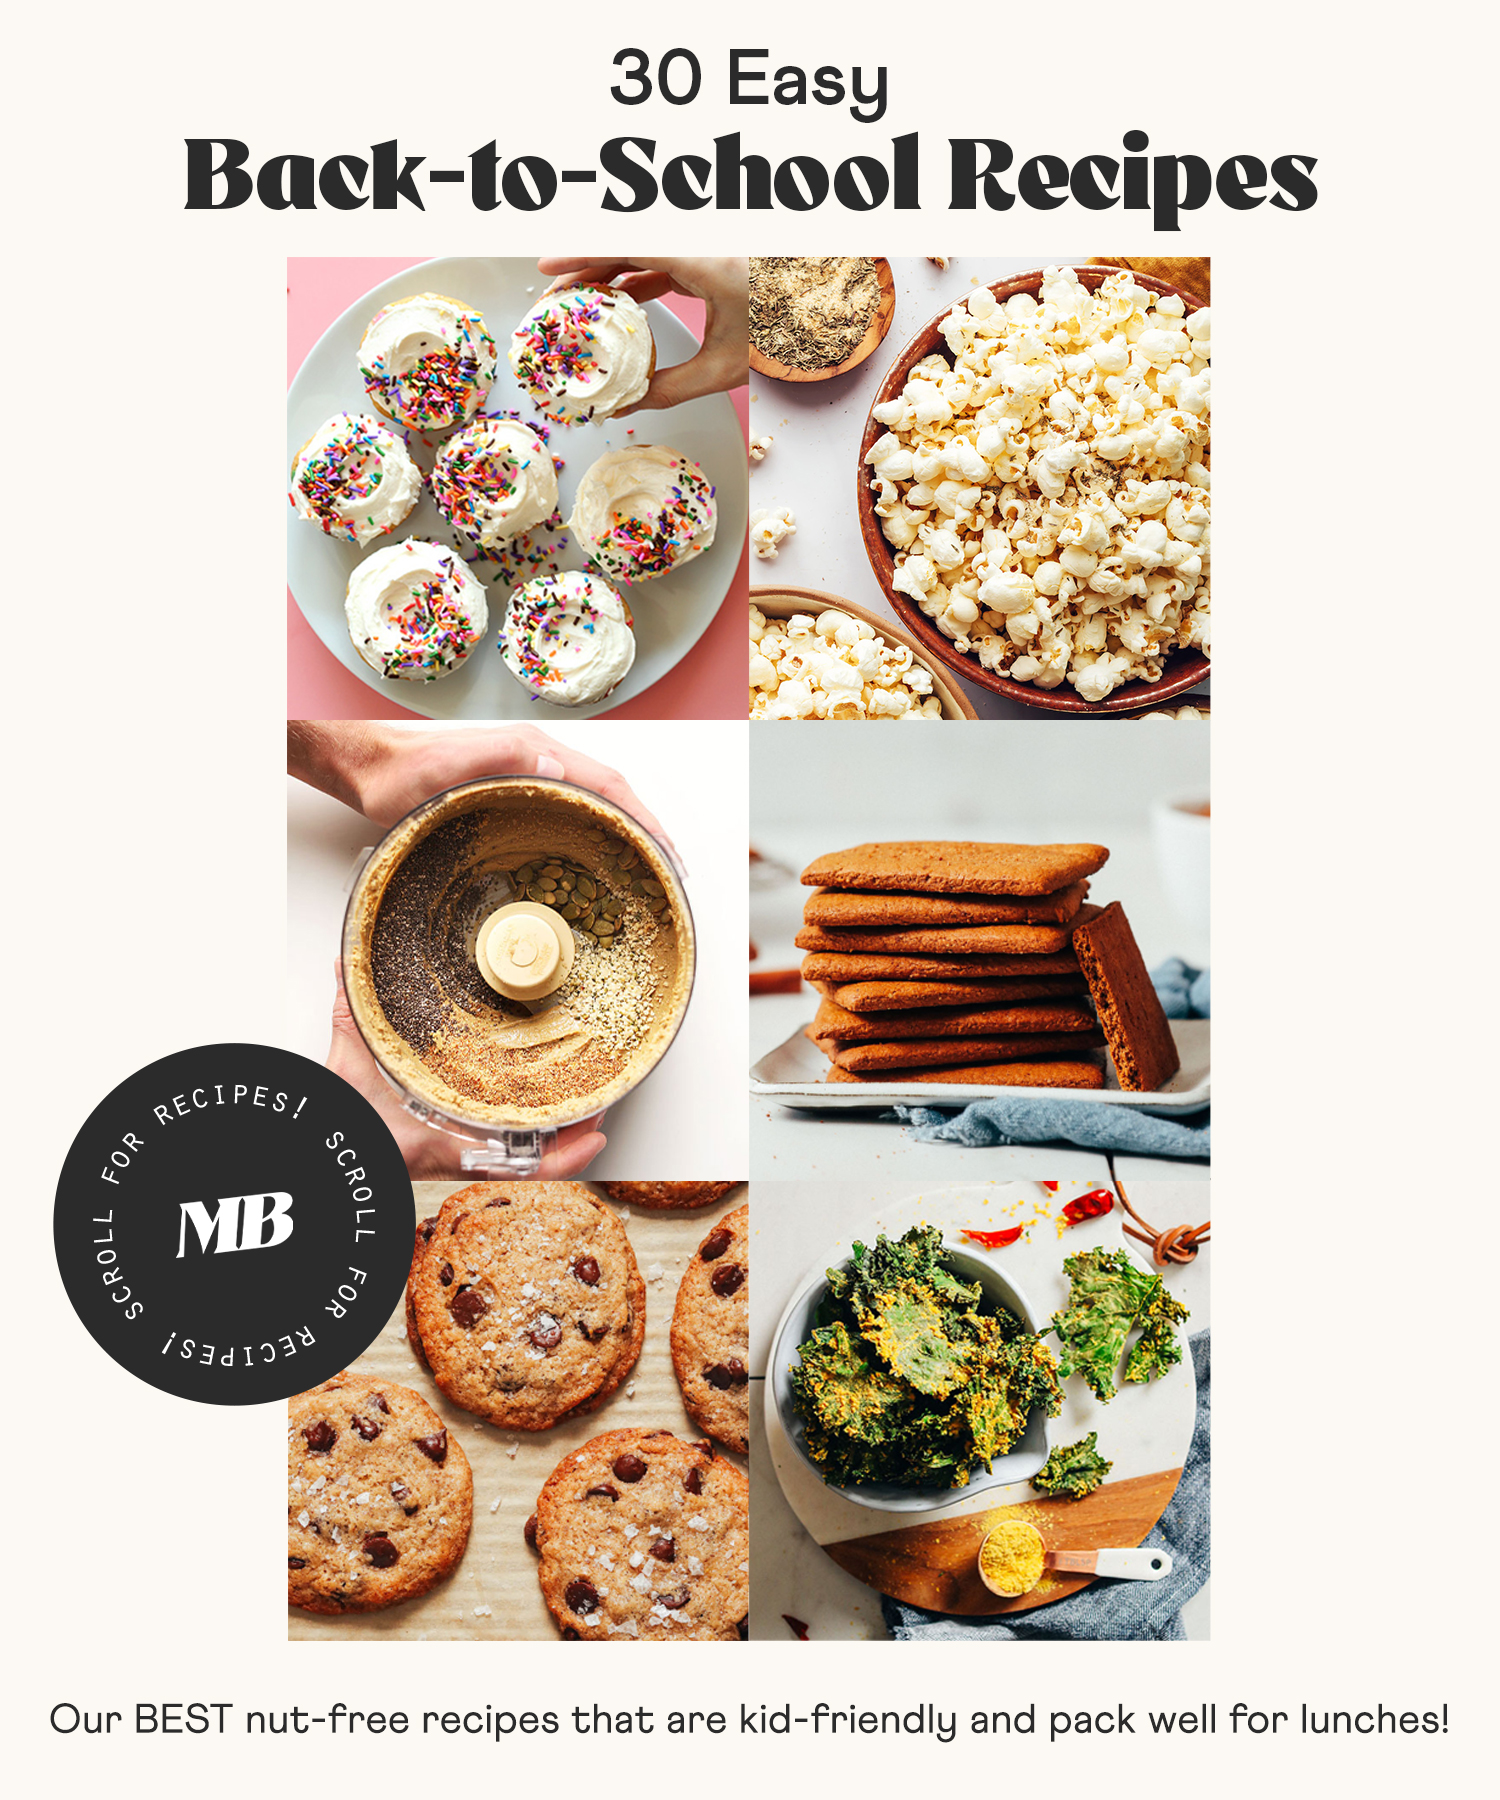 Recipe photos of cupcakes, popcorn, and other easy nut-free back-to-school recipes